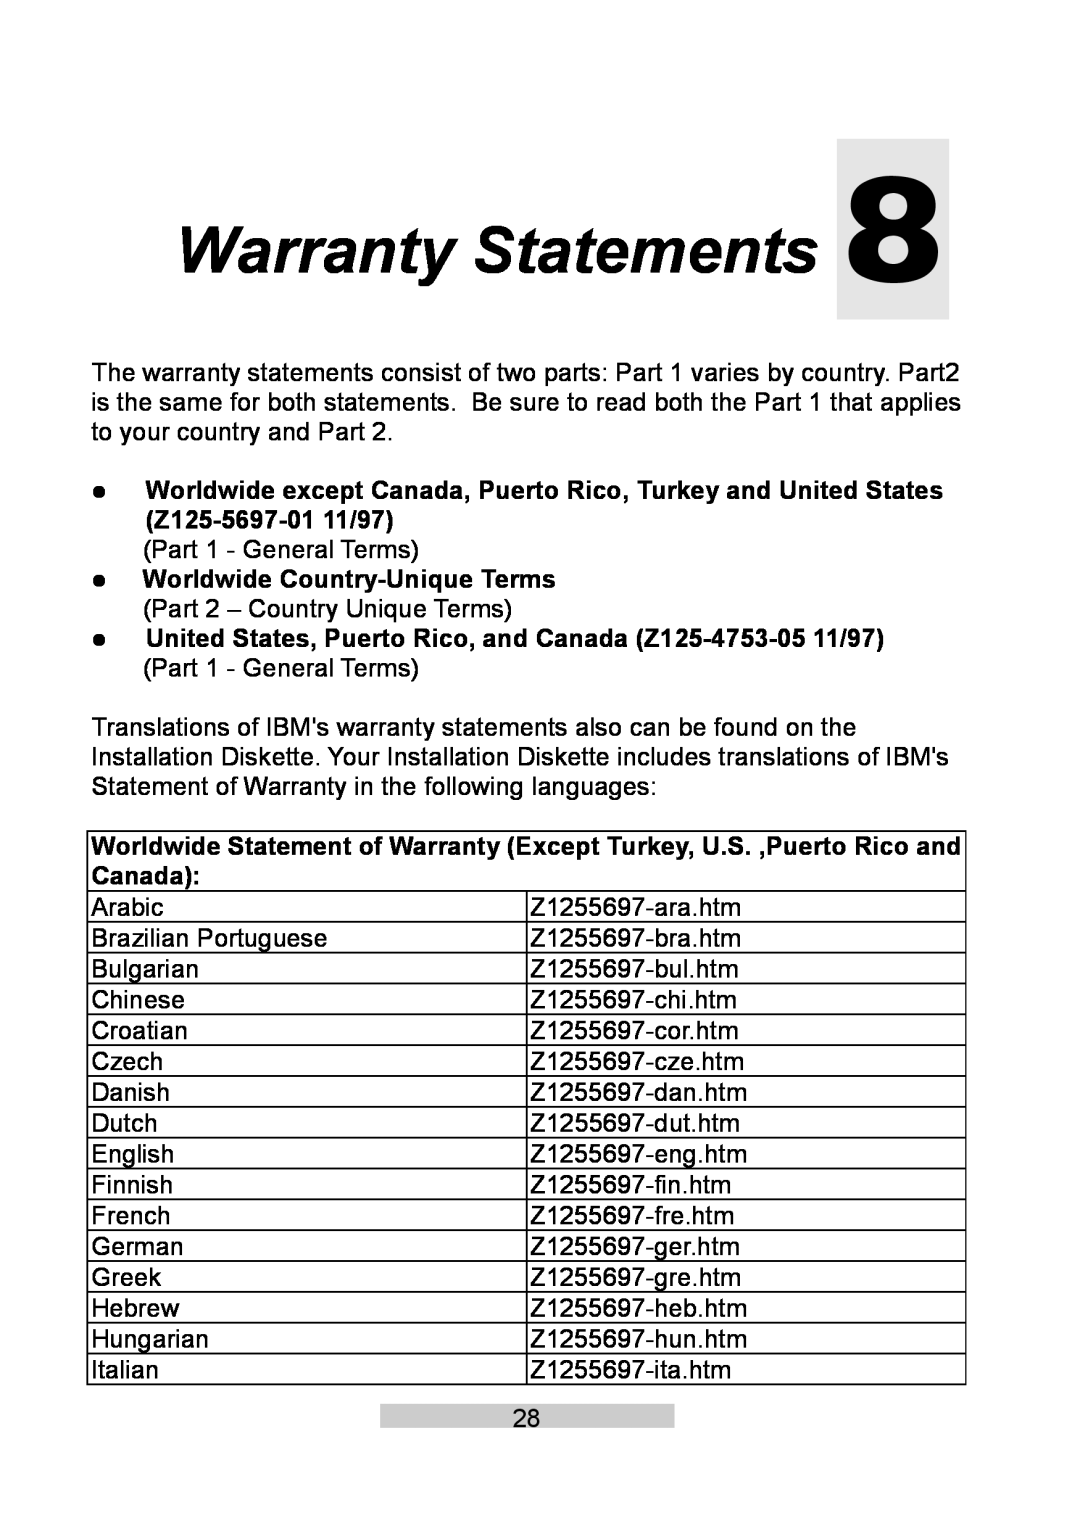 IBM T86A system manual Warranty Statements, z Worldwide Country-Unique Terms Part 2 - Country Unique Terms 